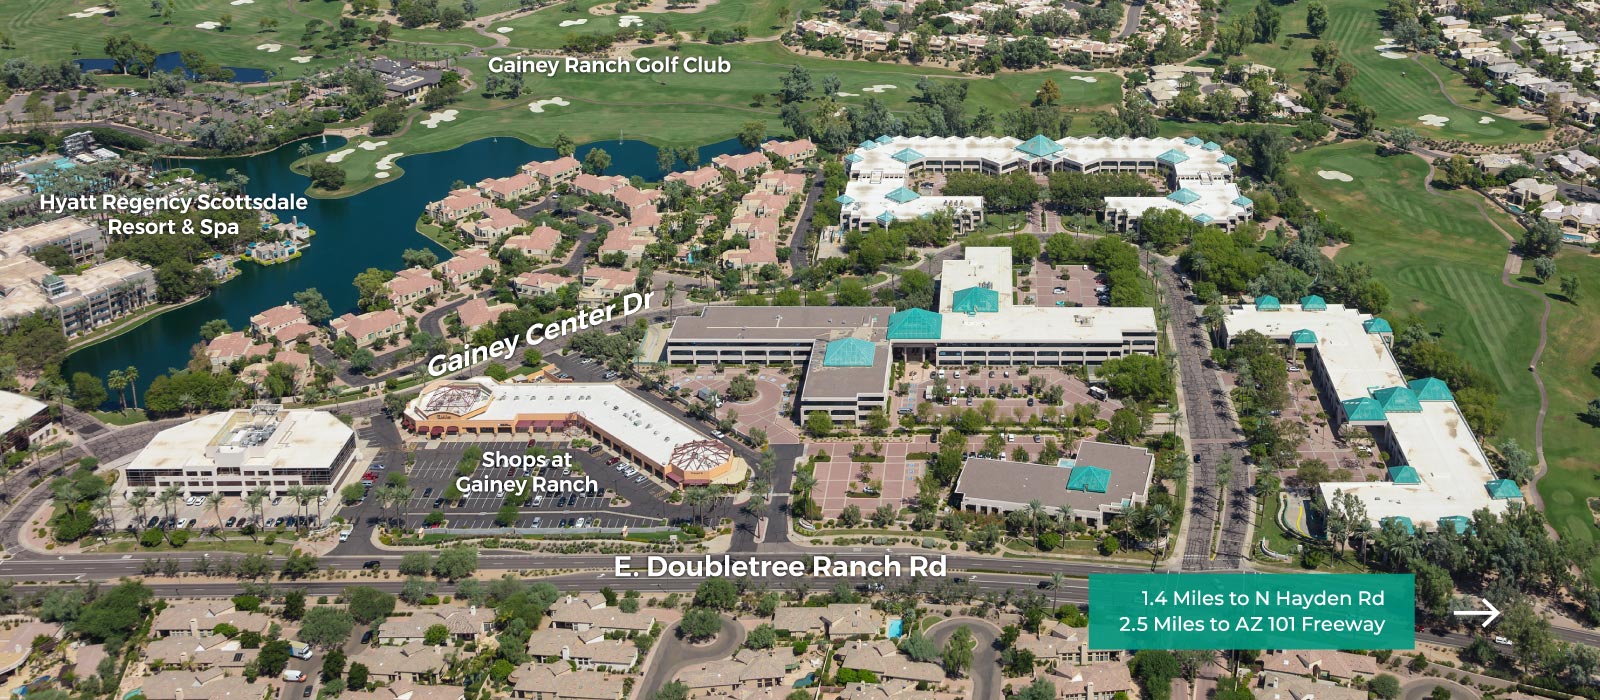 Gainey Ranch Aerial Image